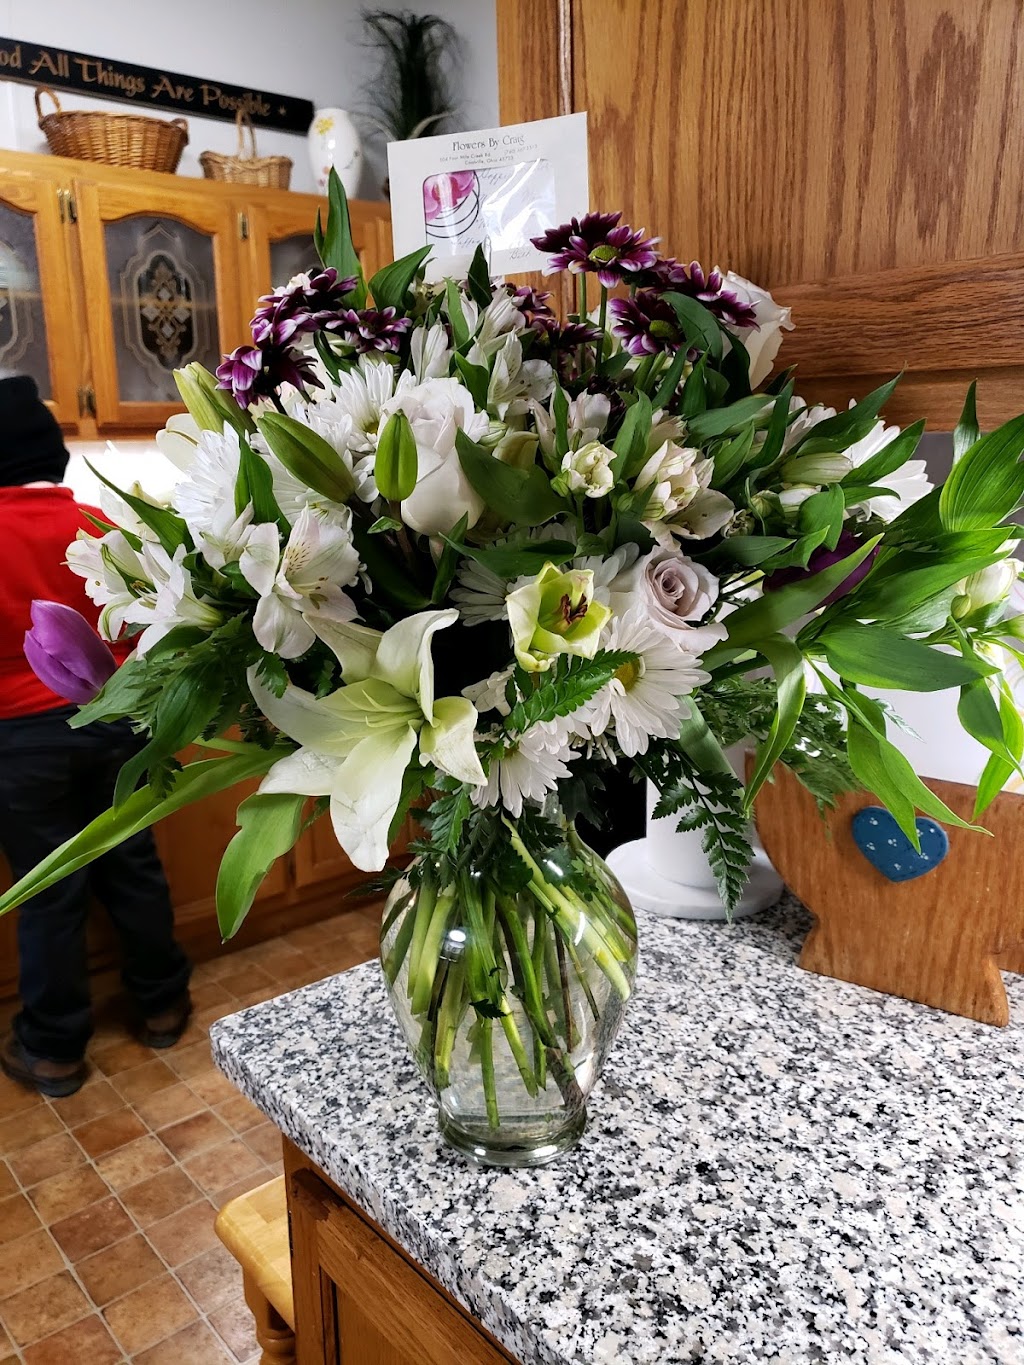 Flowers By Craig | 504 4 Mile Creek Rd, Coolville, OH 45723 | Phone: (740) 667-3513